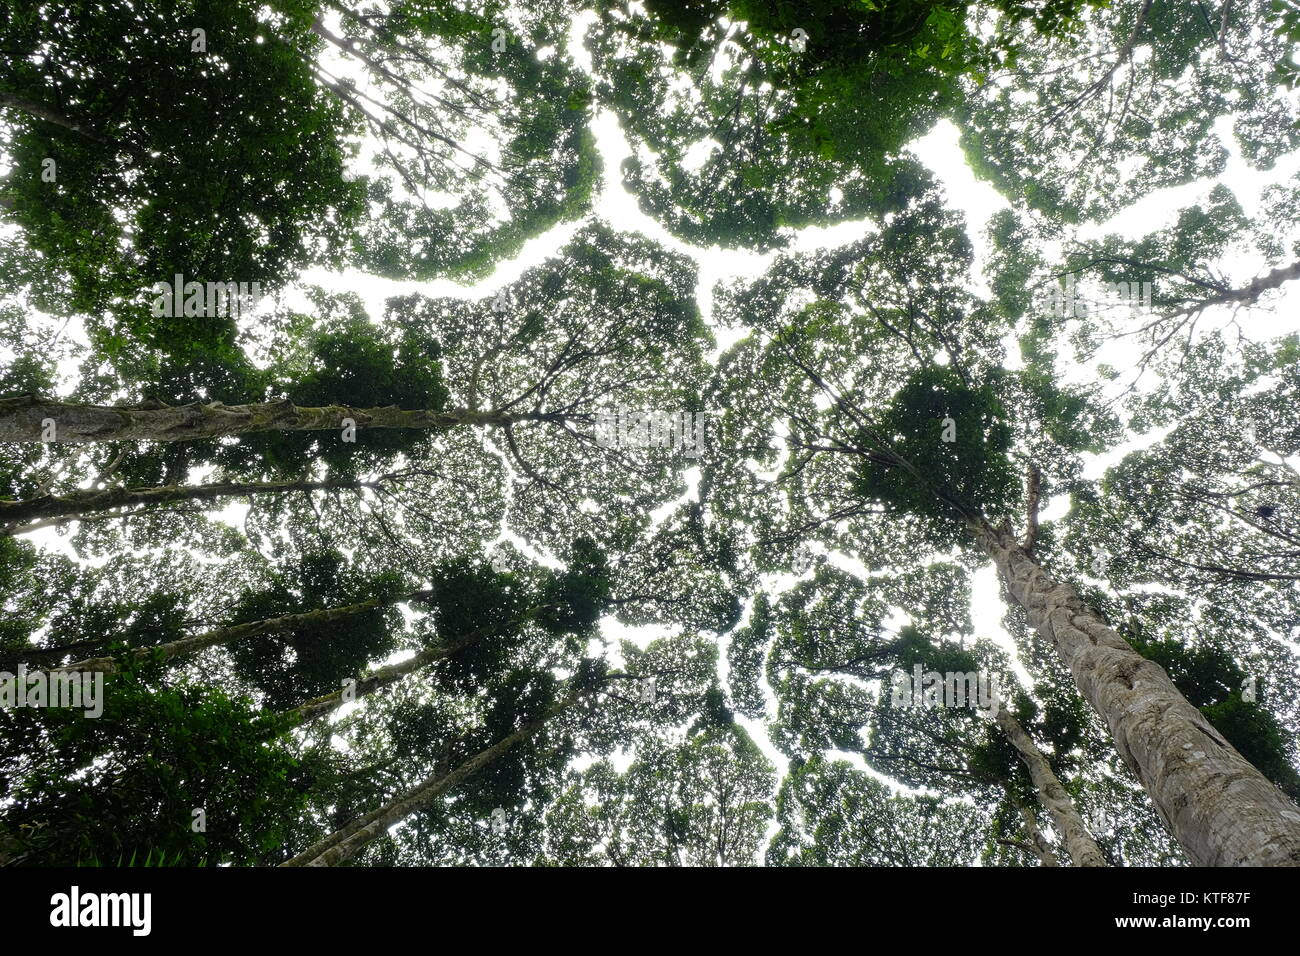 The crown of shyness phenomenon in the Forest Research Institute's forest in Malaysia Stock Photo